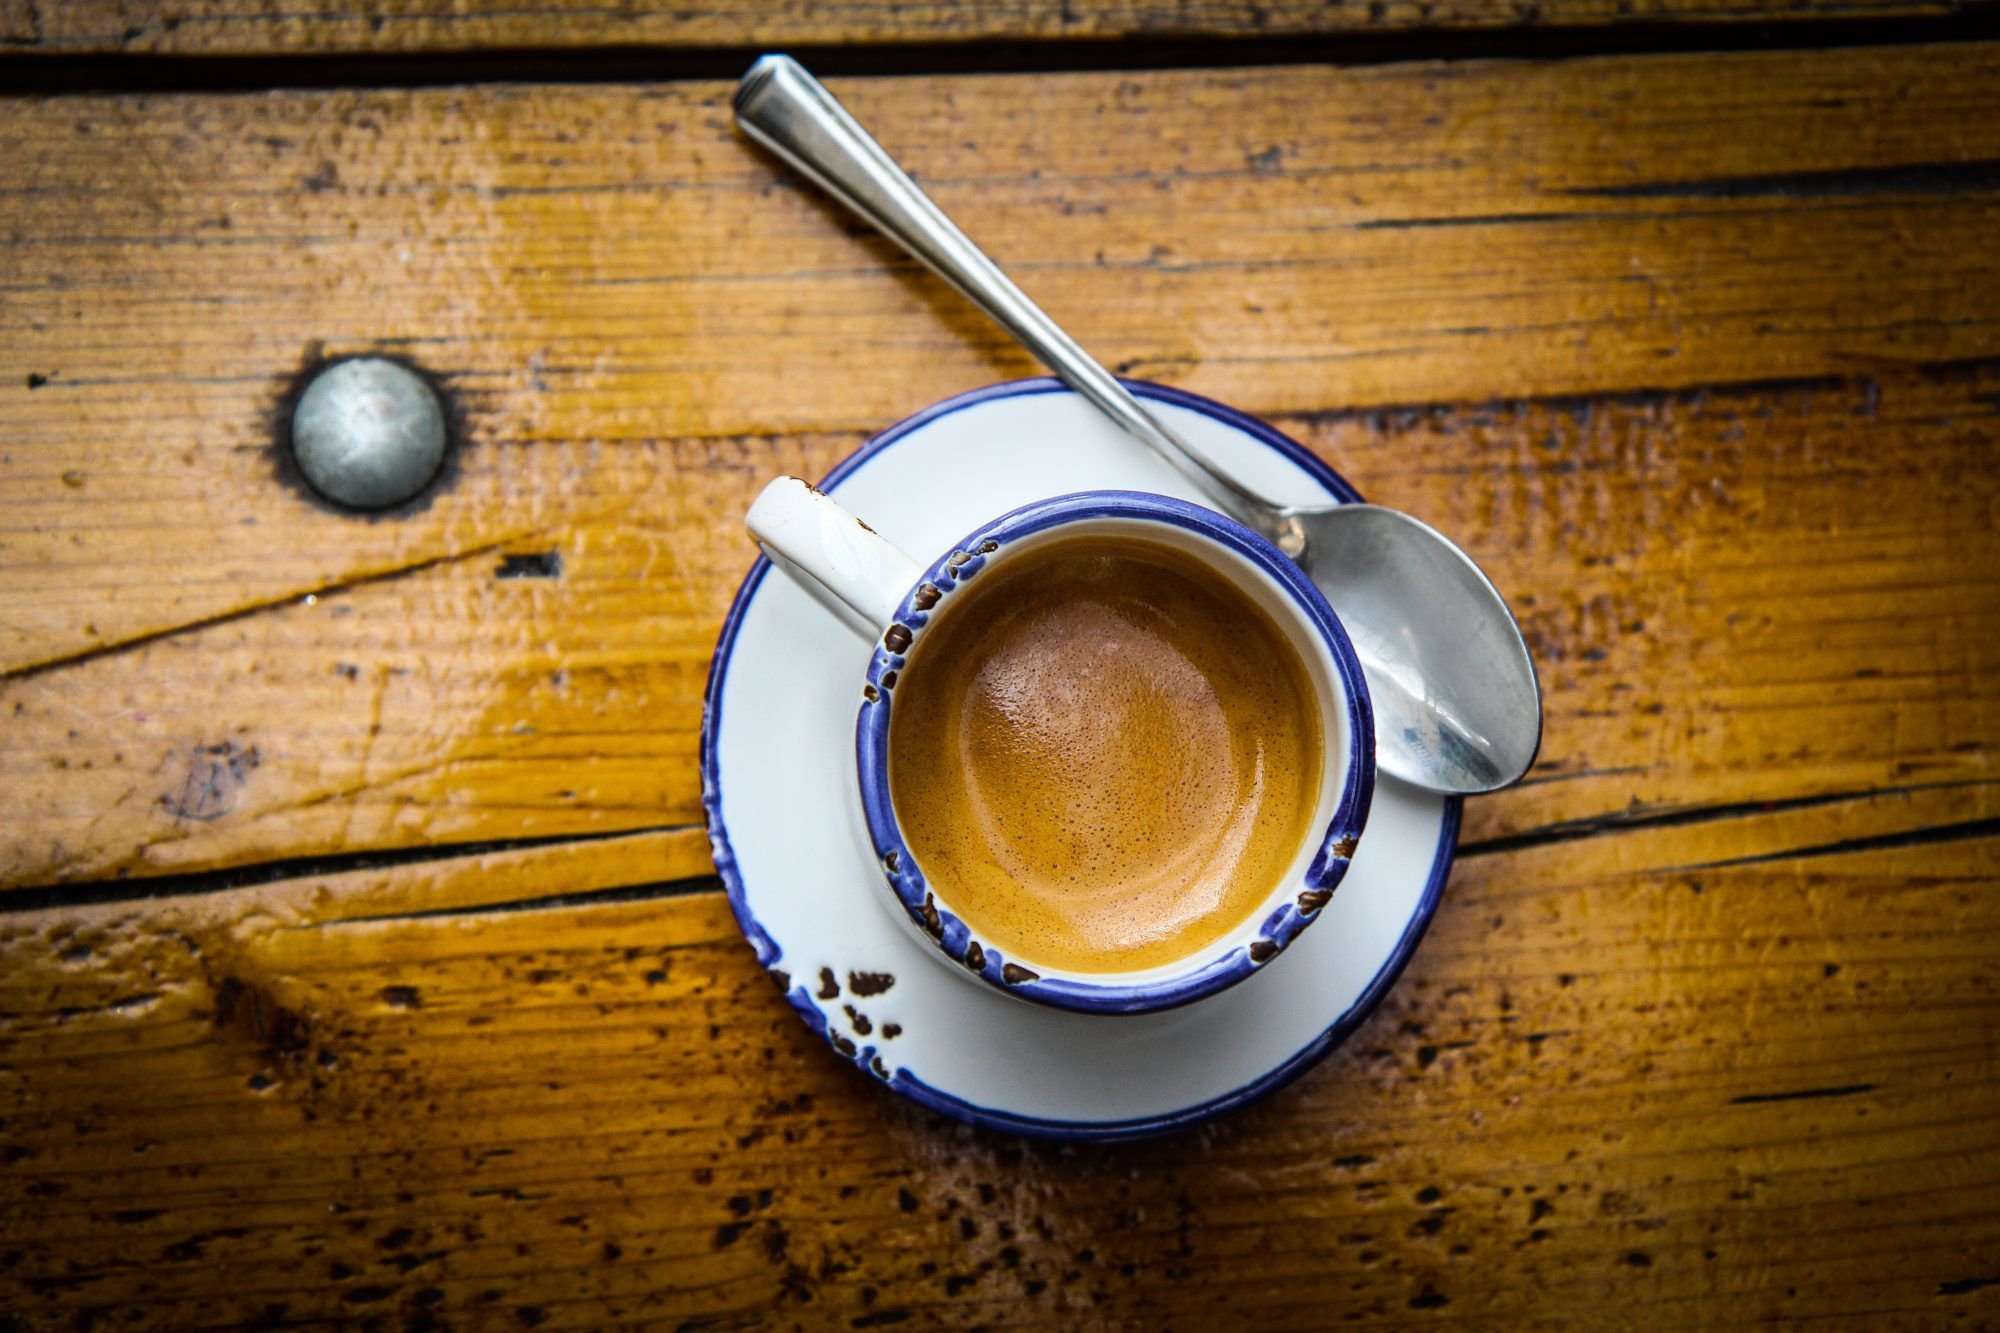 Why Coffee Experts Think You Should Scrape the Crema Off Your Espresso